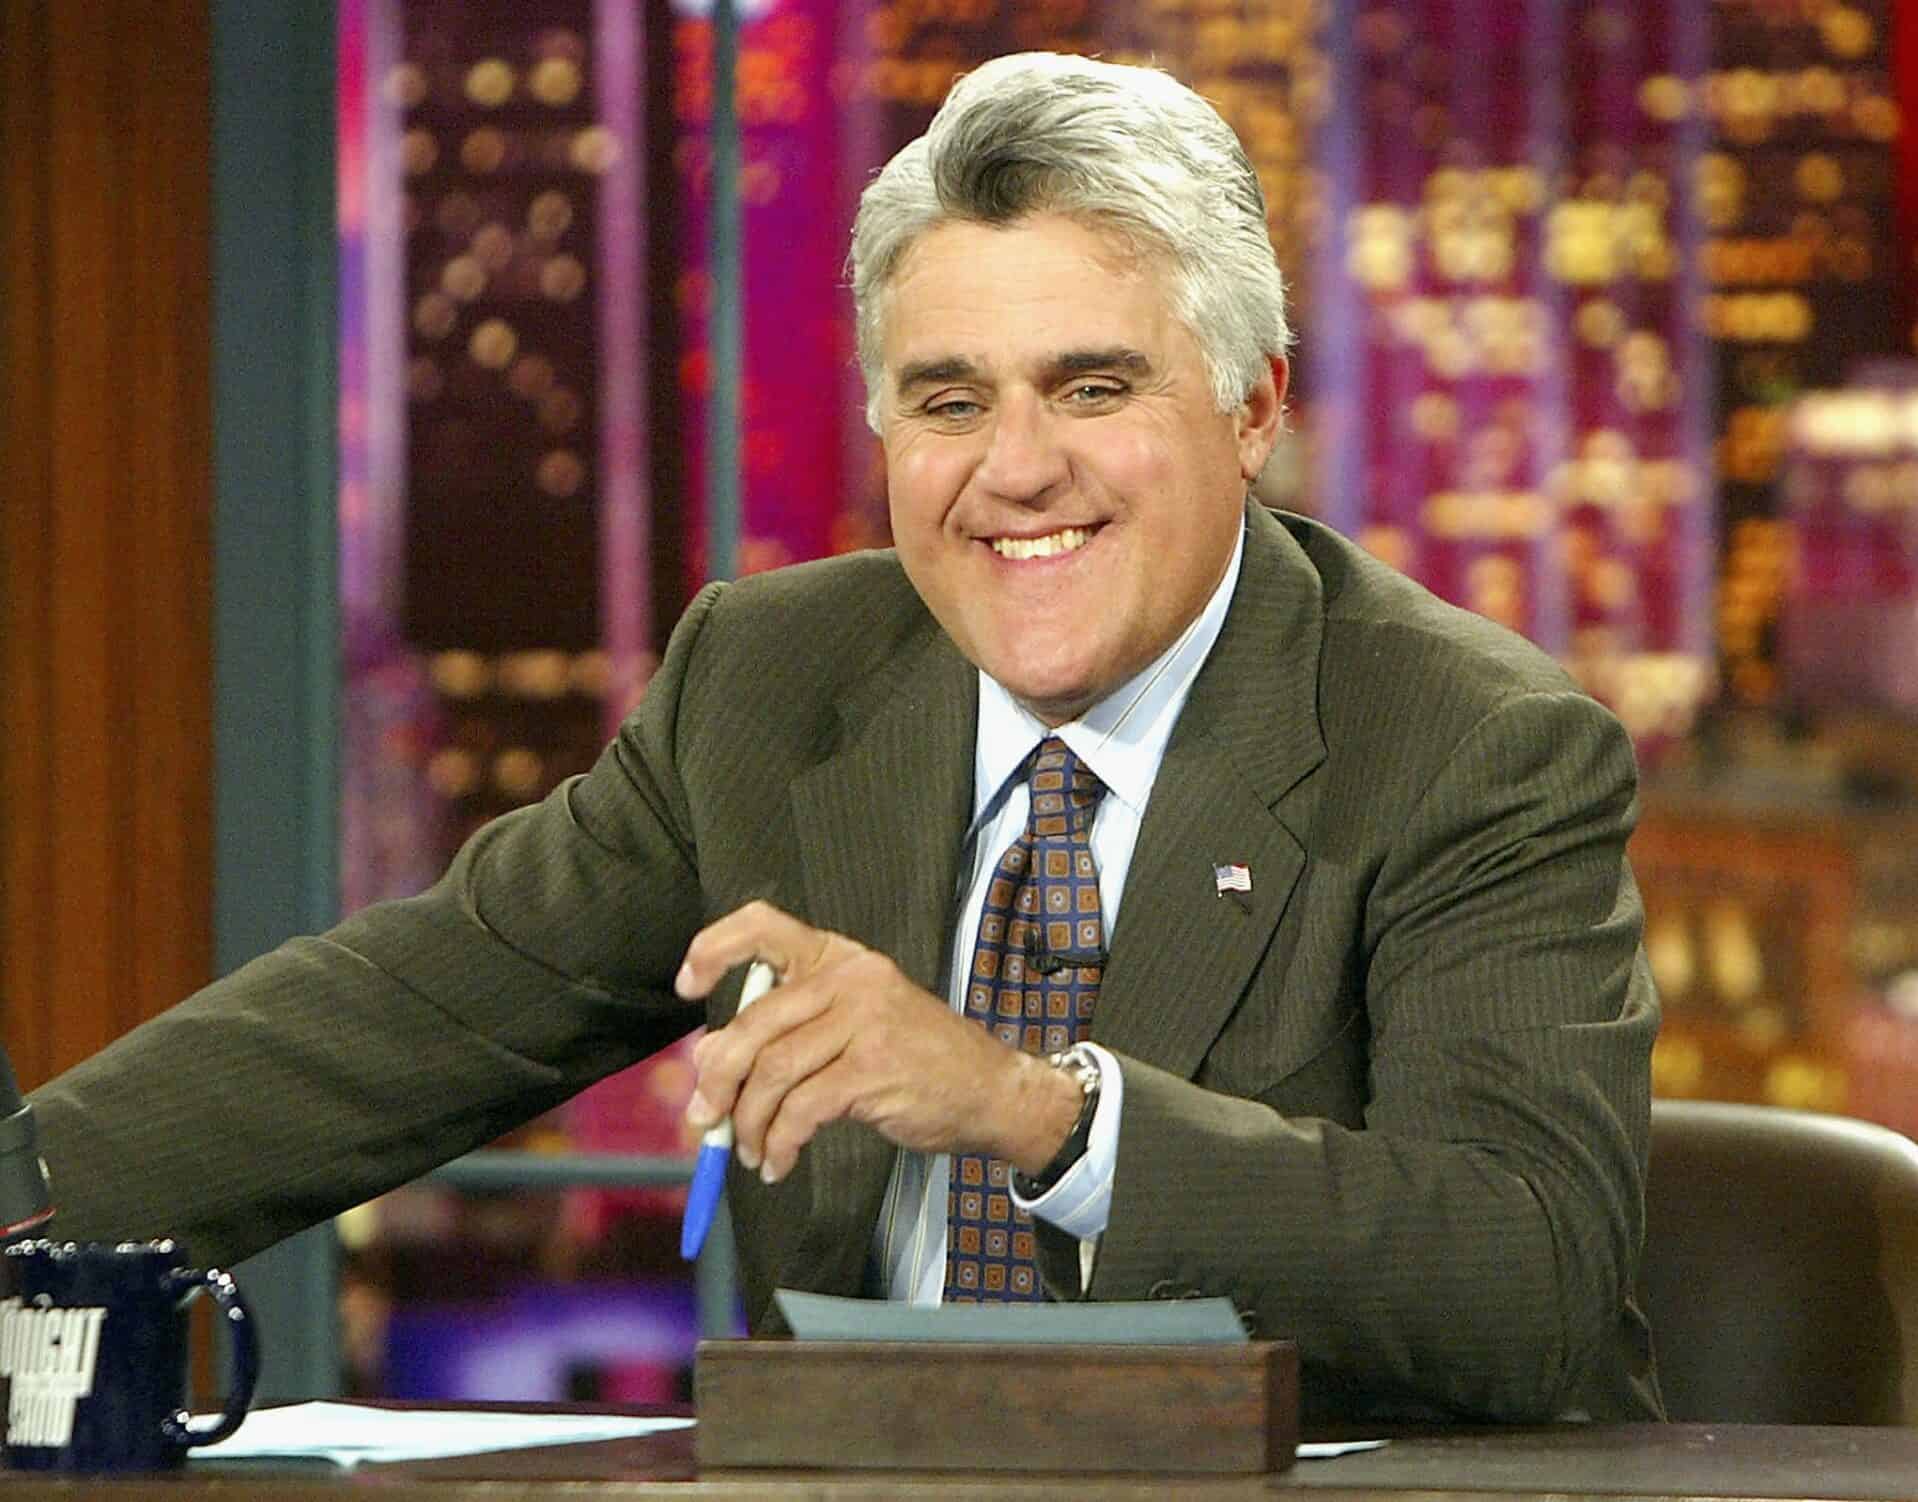 Jay Leno began regularly filling in as a host for Johnny Carson on "The Tonight Show"